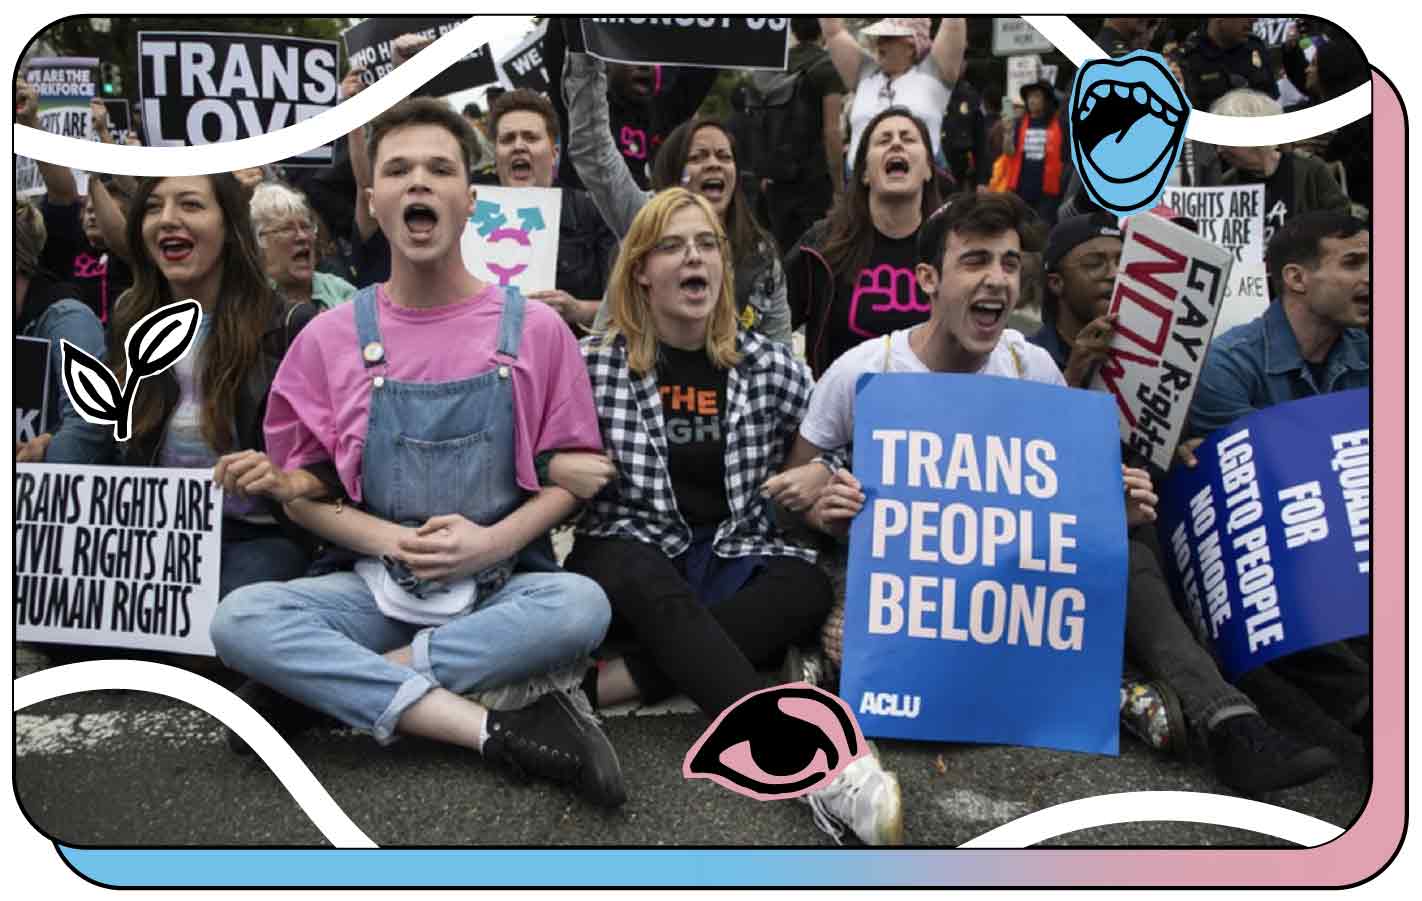 Crowd holding signs at a rally. One sign reads "Trans People Belong."